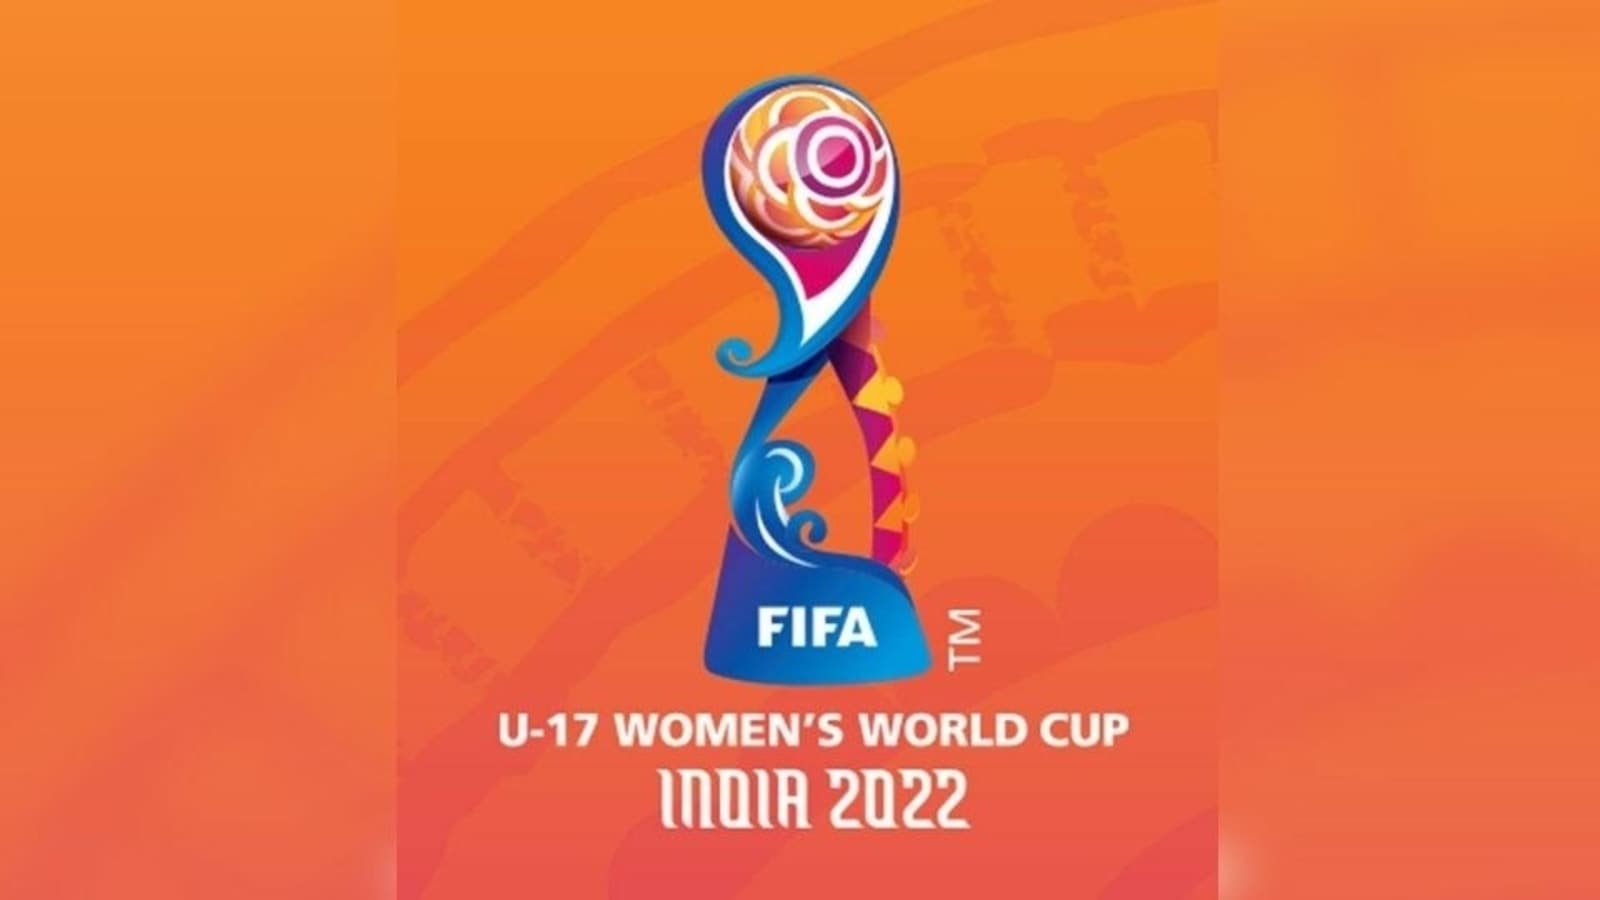 U-17 Women's World Cup to be held in India in October 2022: FIFA